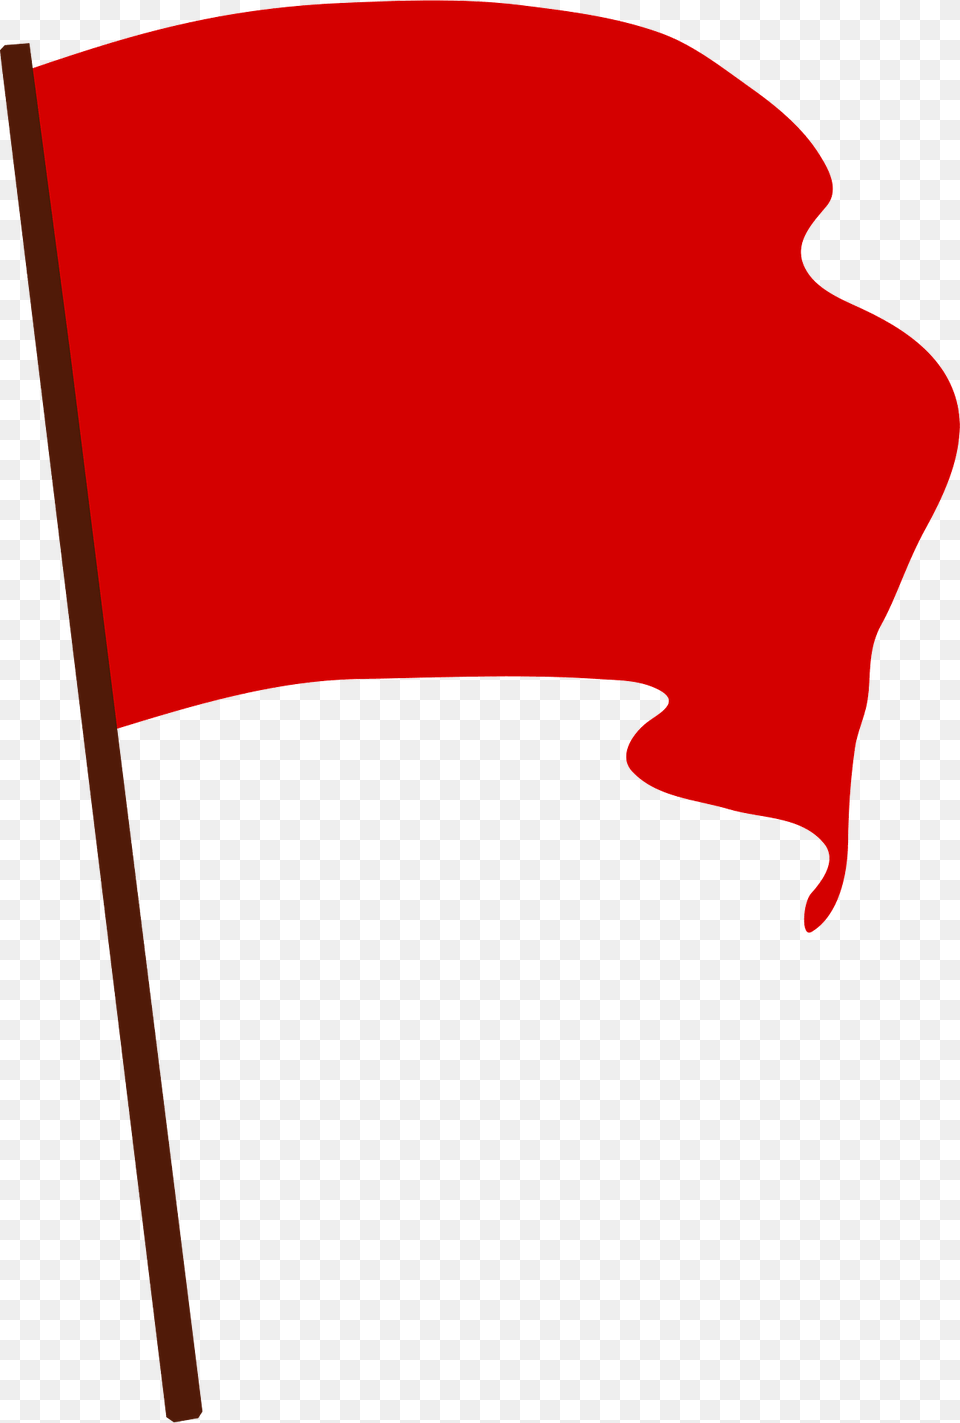 Red Flag Clipart Png